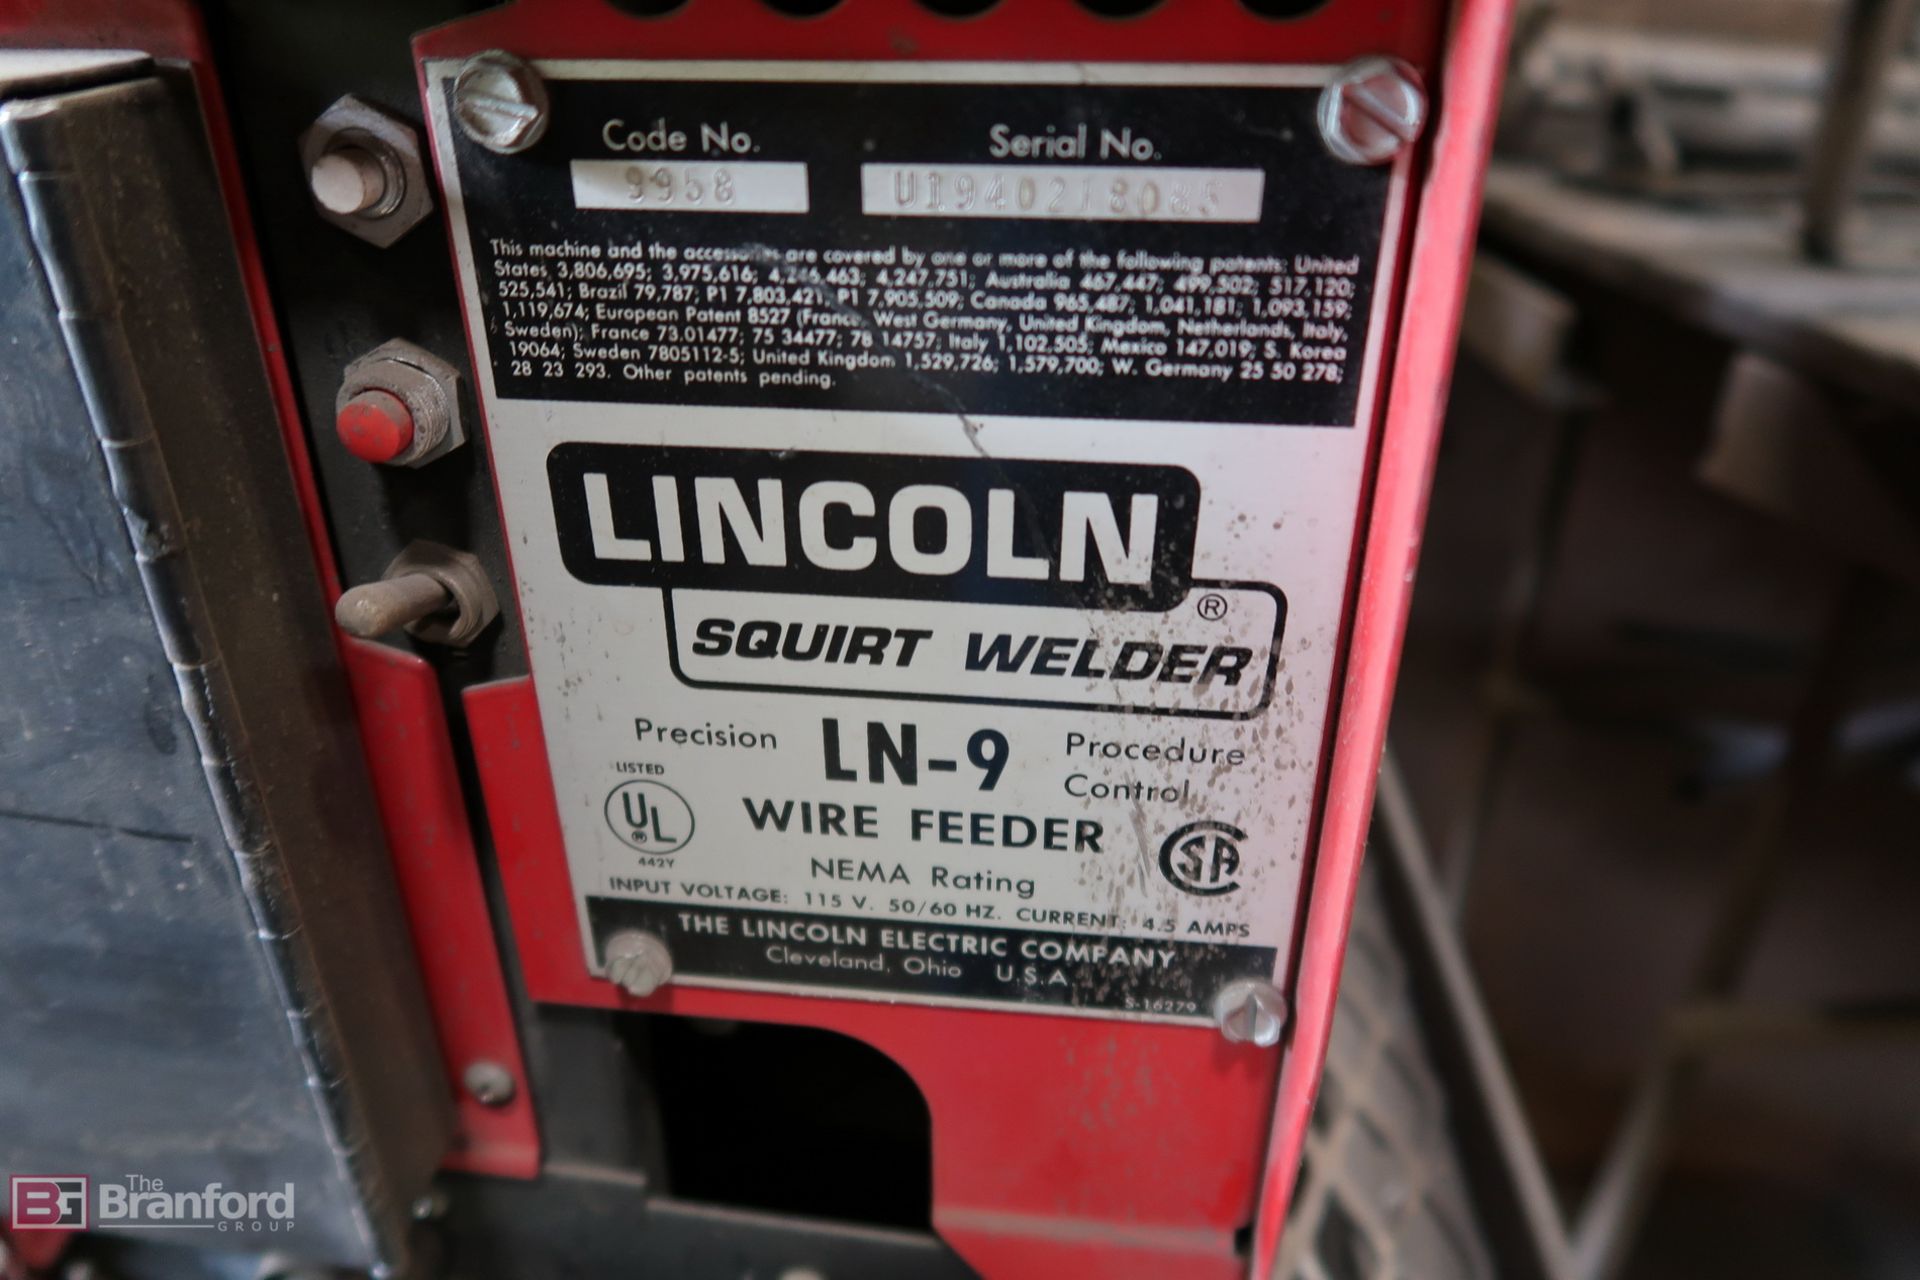 Lincoln LN-9 Squirt Welder Multiprocess Wire Feeder - Image 2 of 4